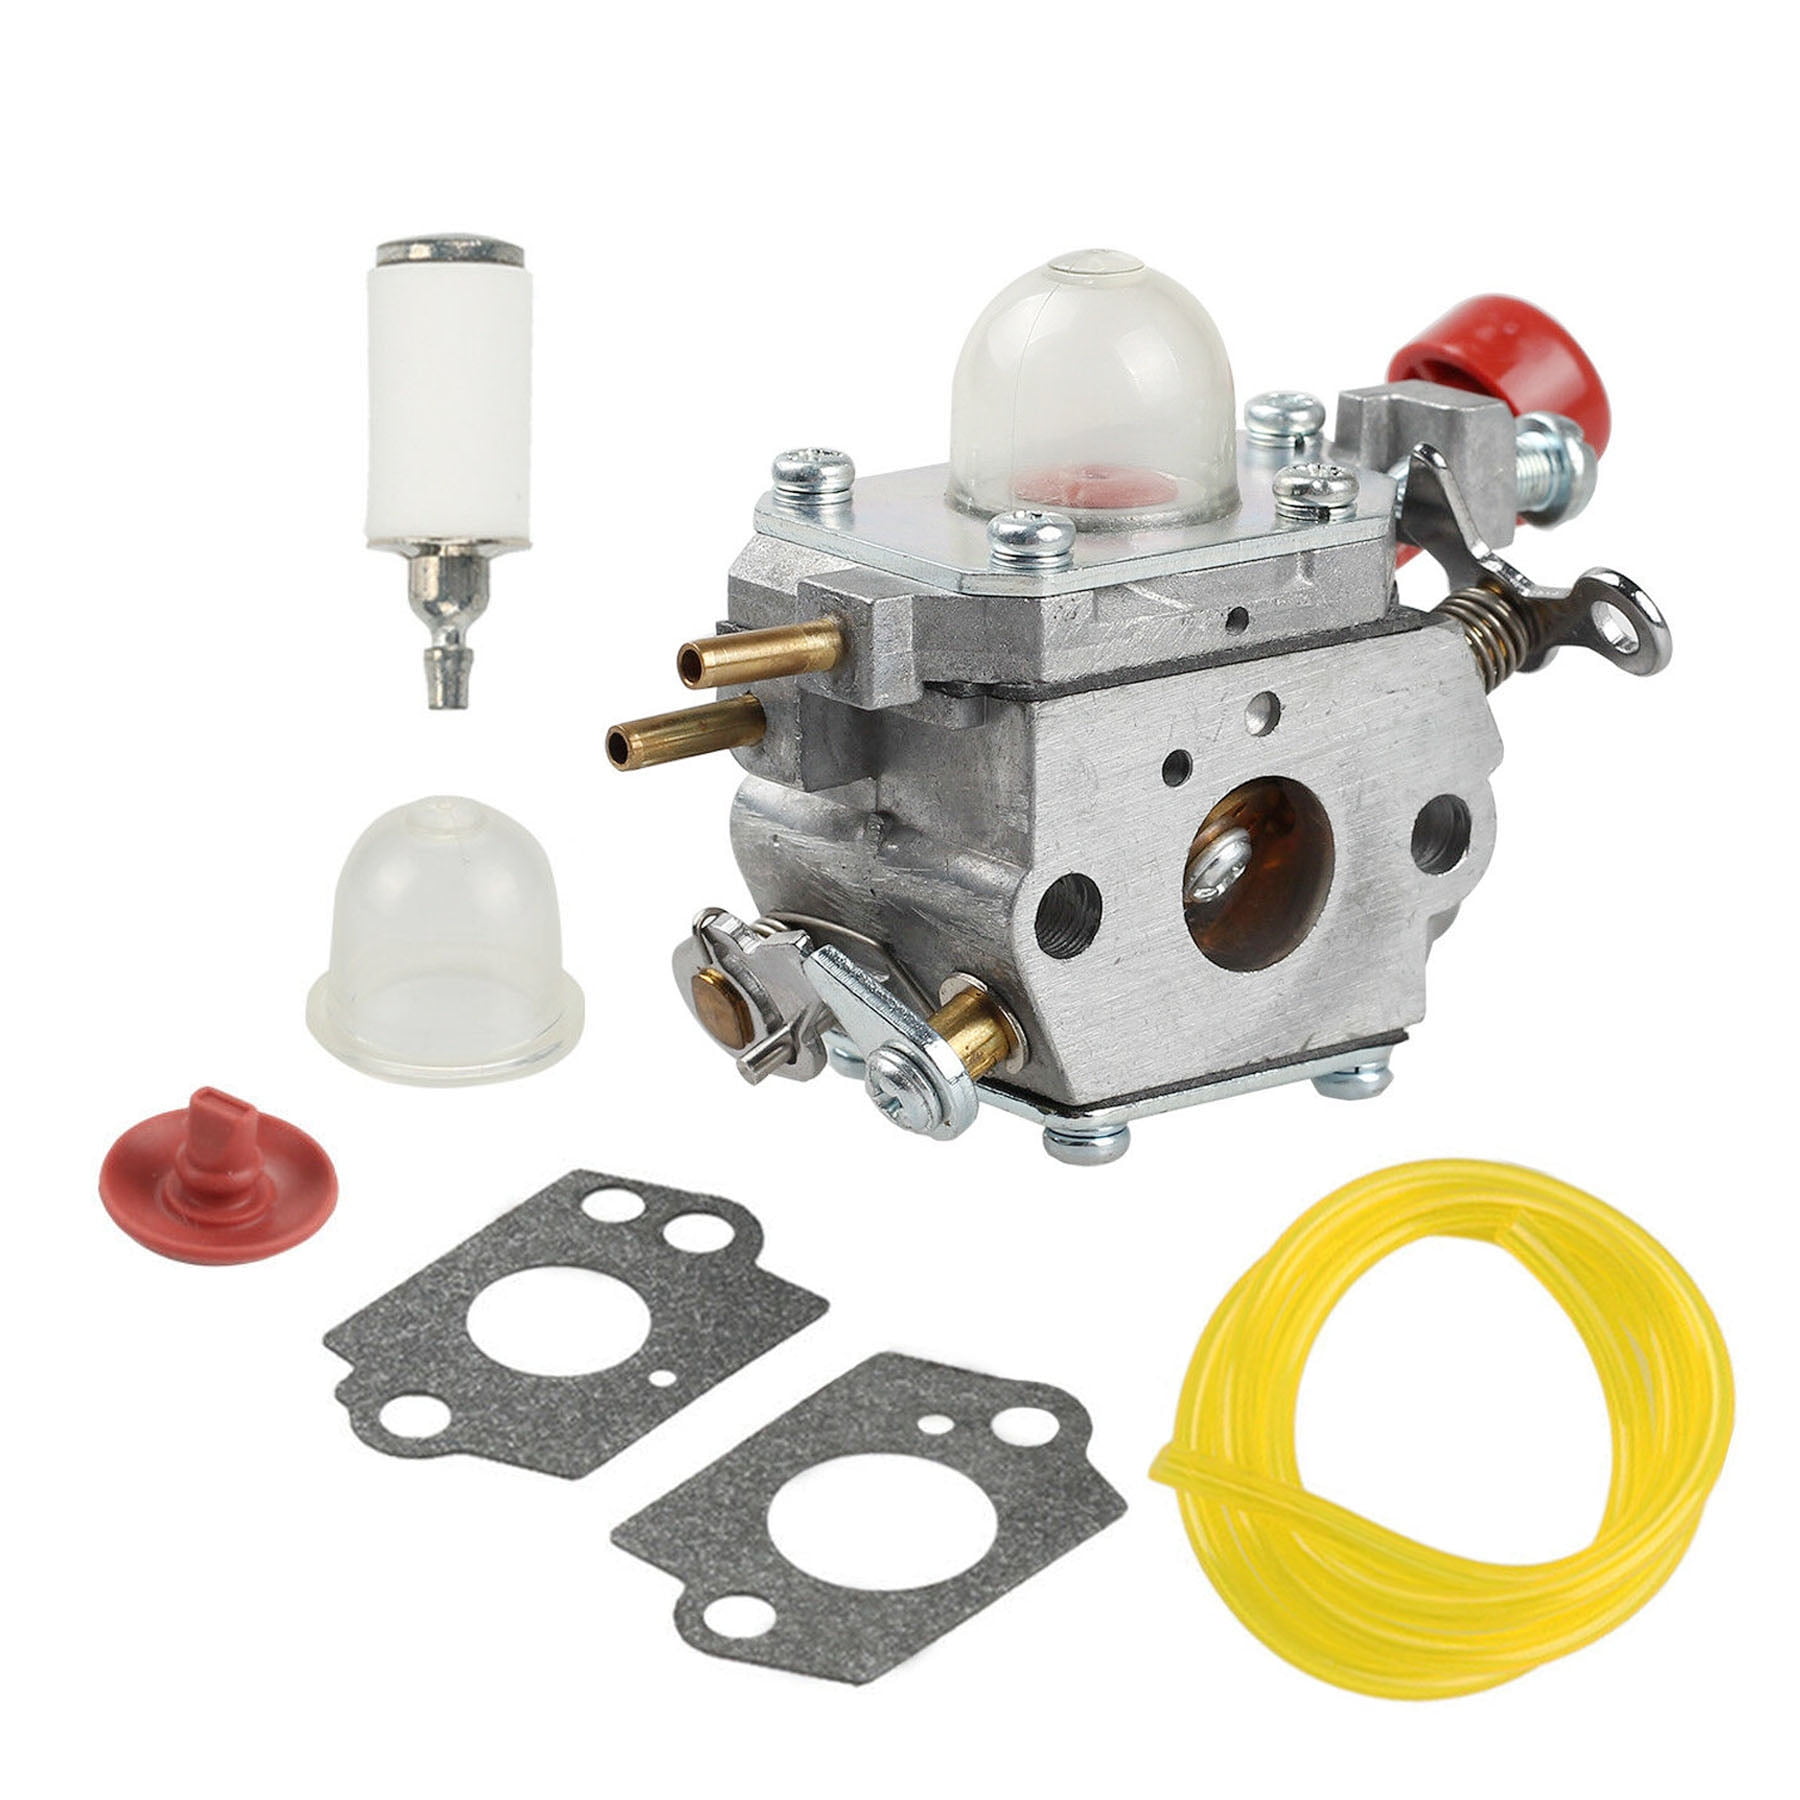 findmall Carburetor Replacement for Sear Craftsman 27cc Weed Eater